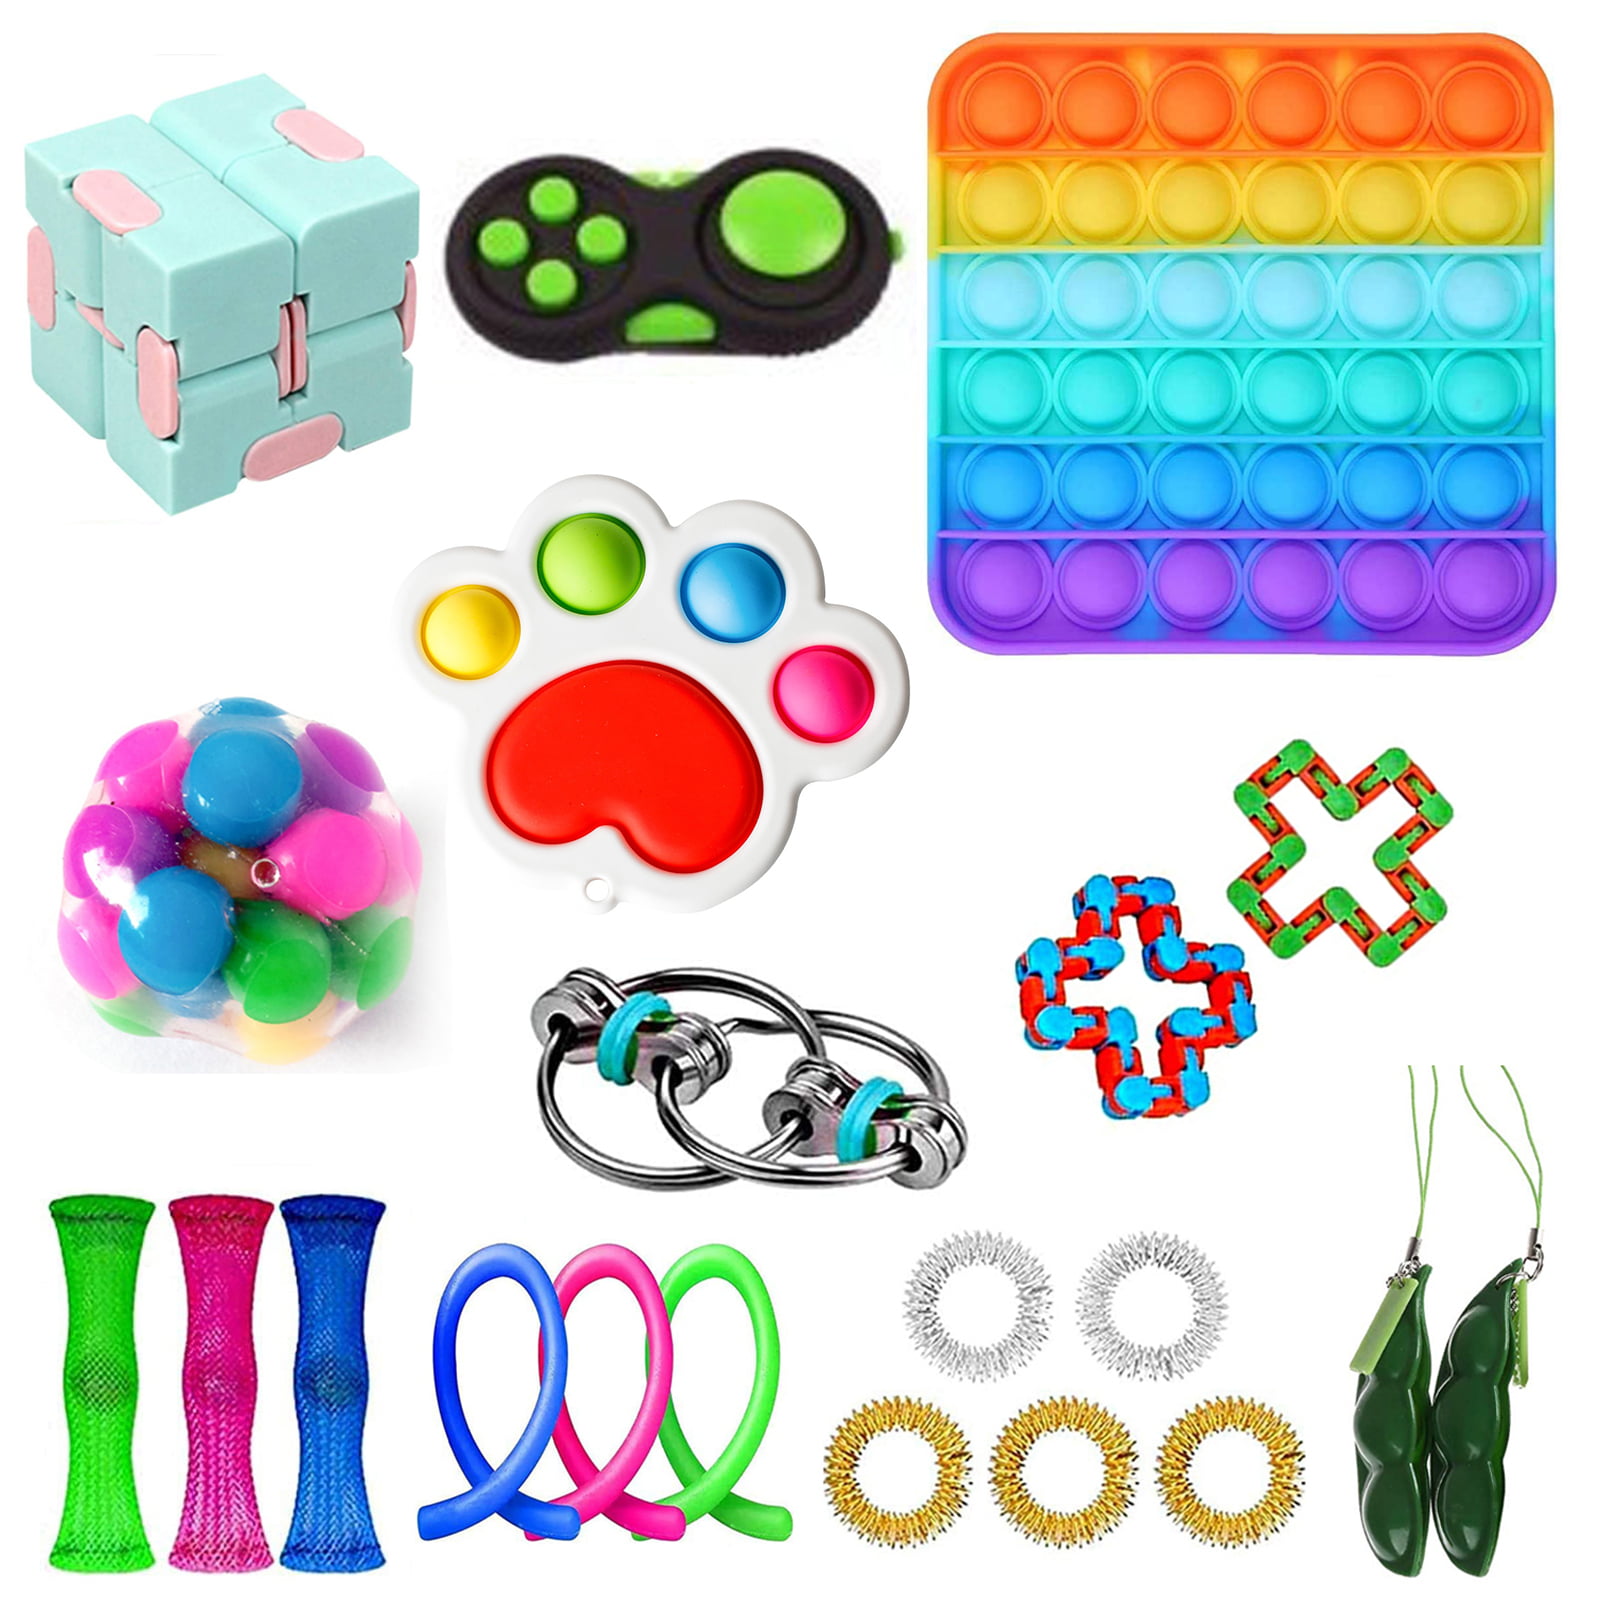 Anxiety Relief Items for ADHD Autism Special Needs Family and Friends YiFi-Tek 1PCS Pop Sensory Fidget Toy Bubble Fidget Toys 1pc-Rainbow Robot